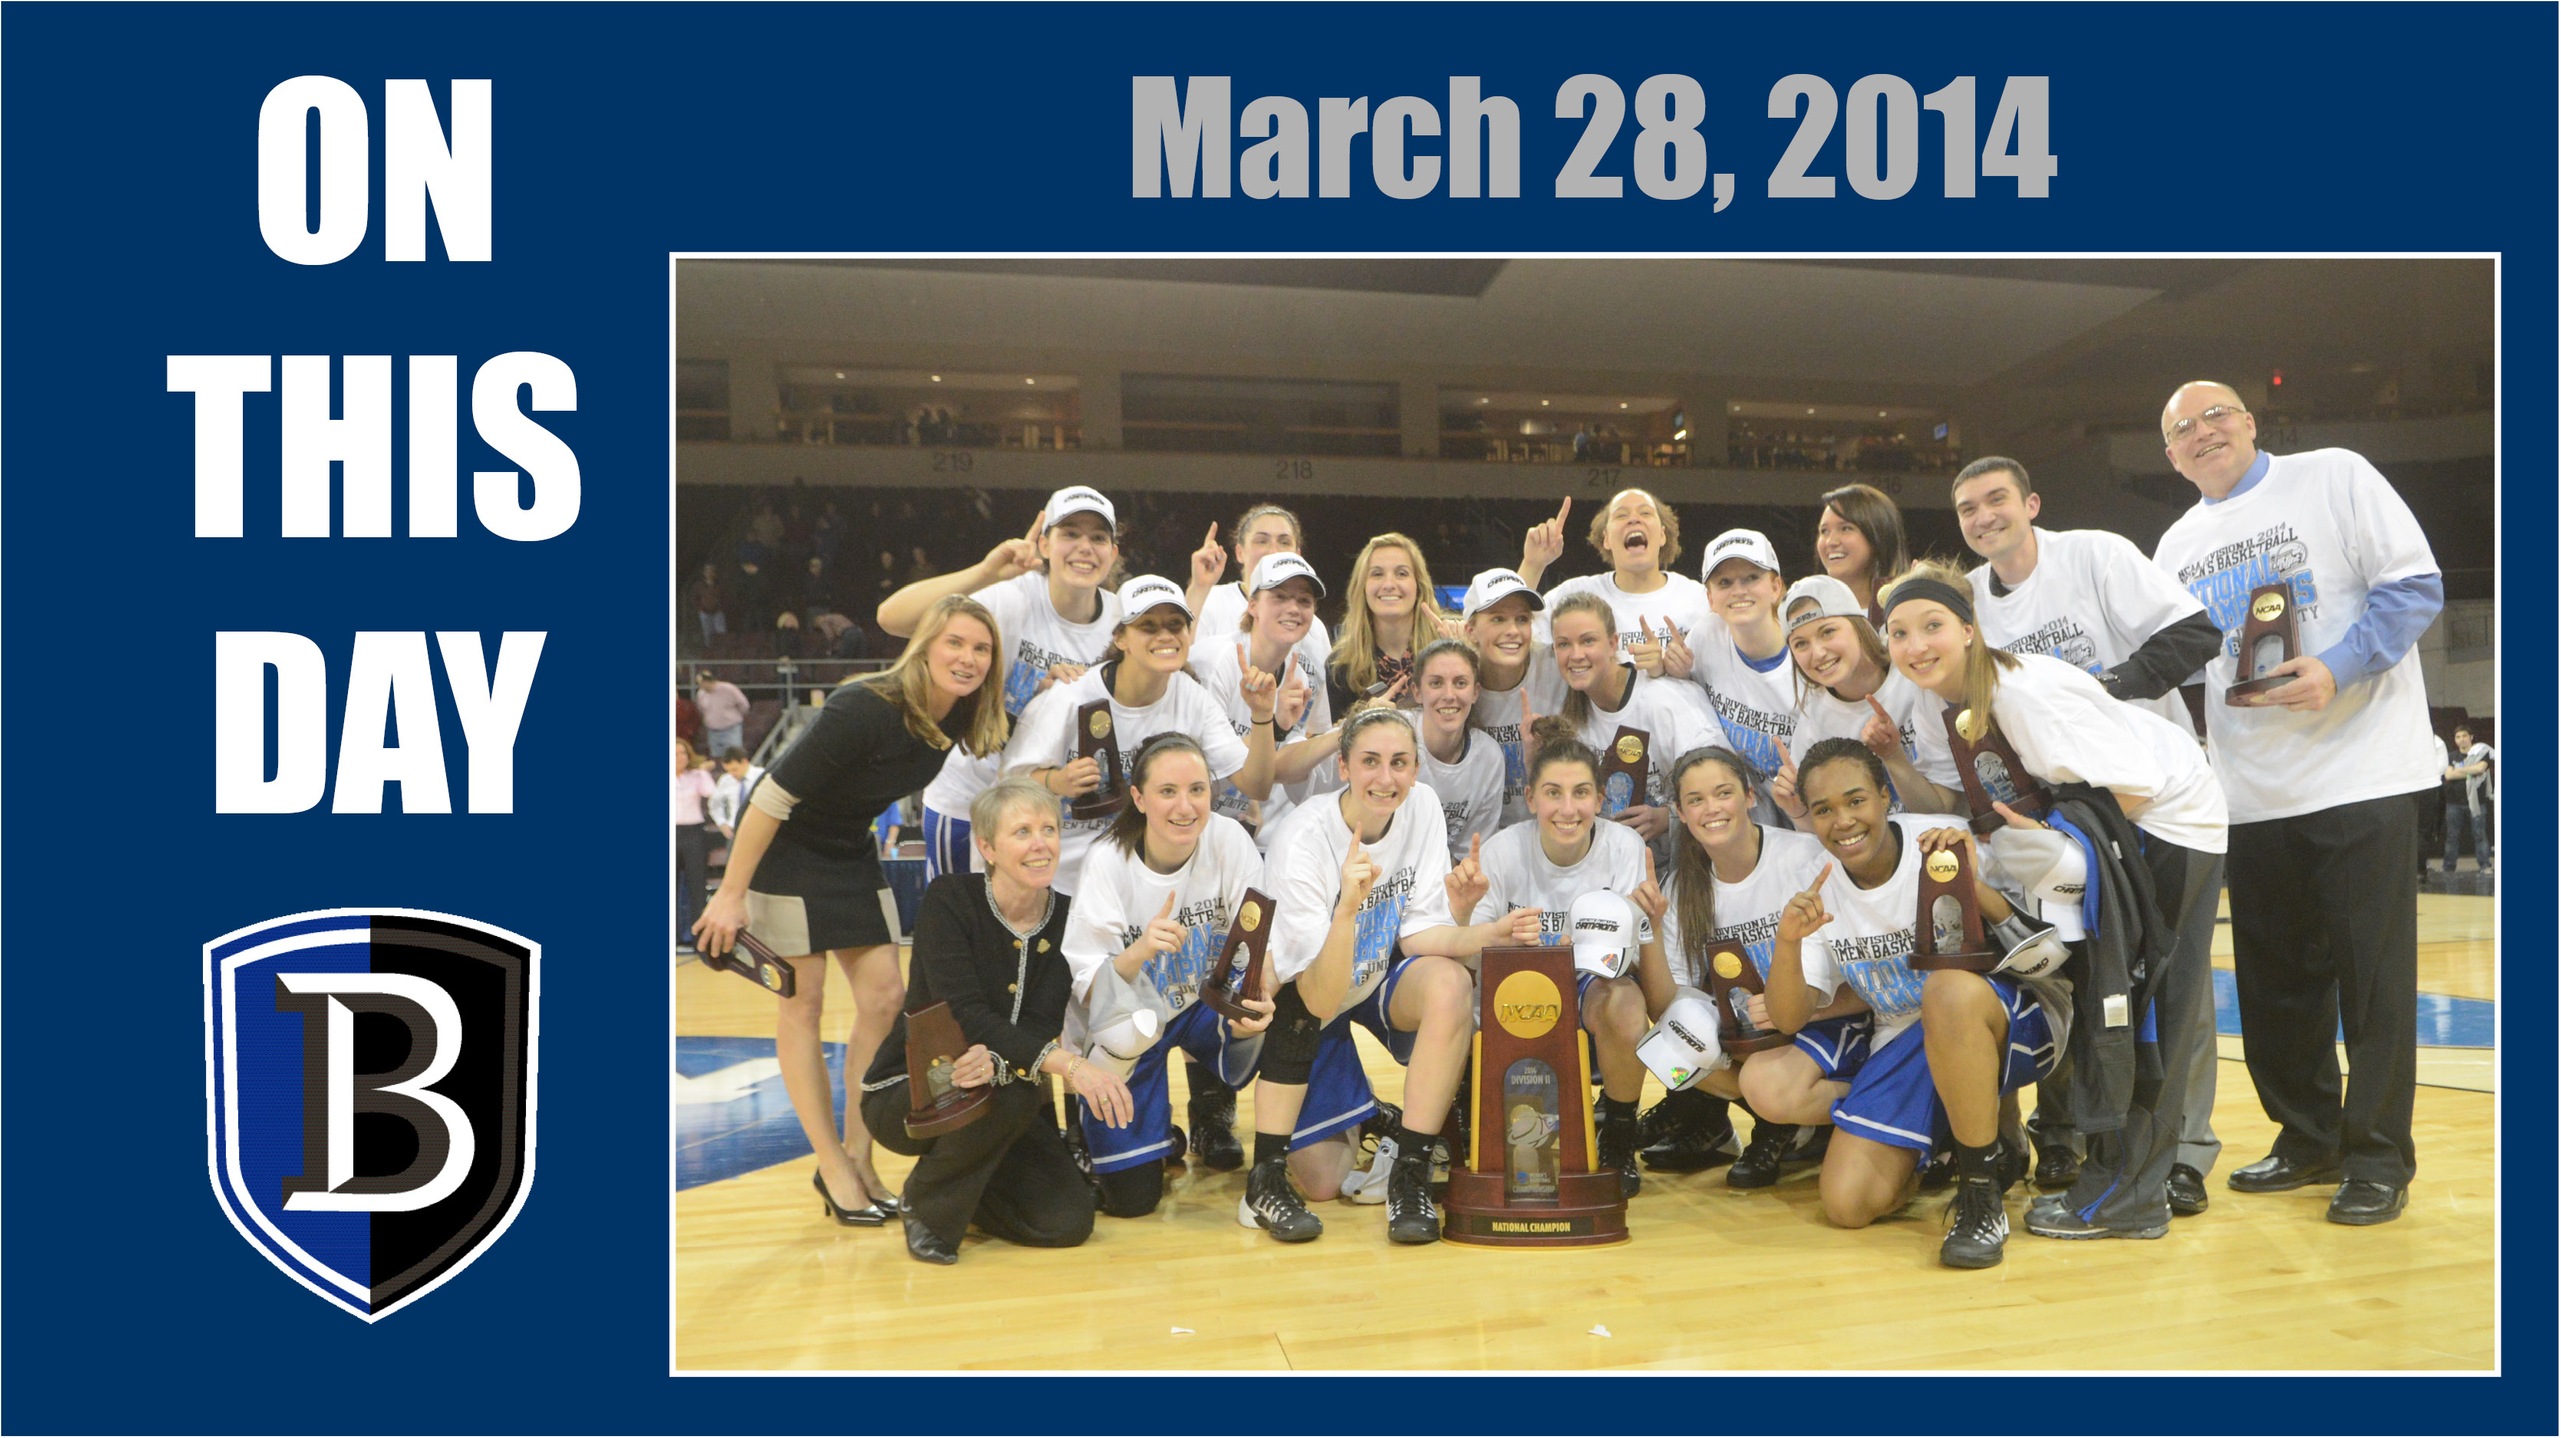 The 2014 NCAA Division II women's basketball national champions!